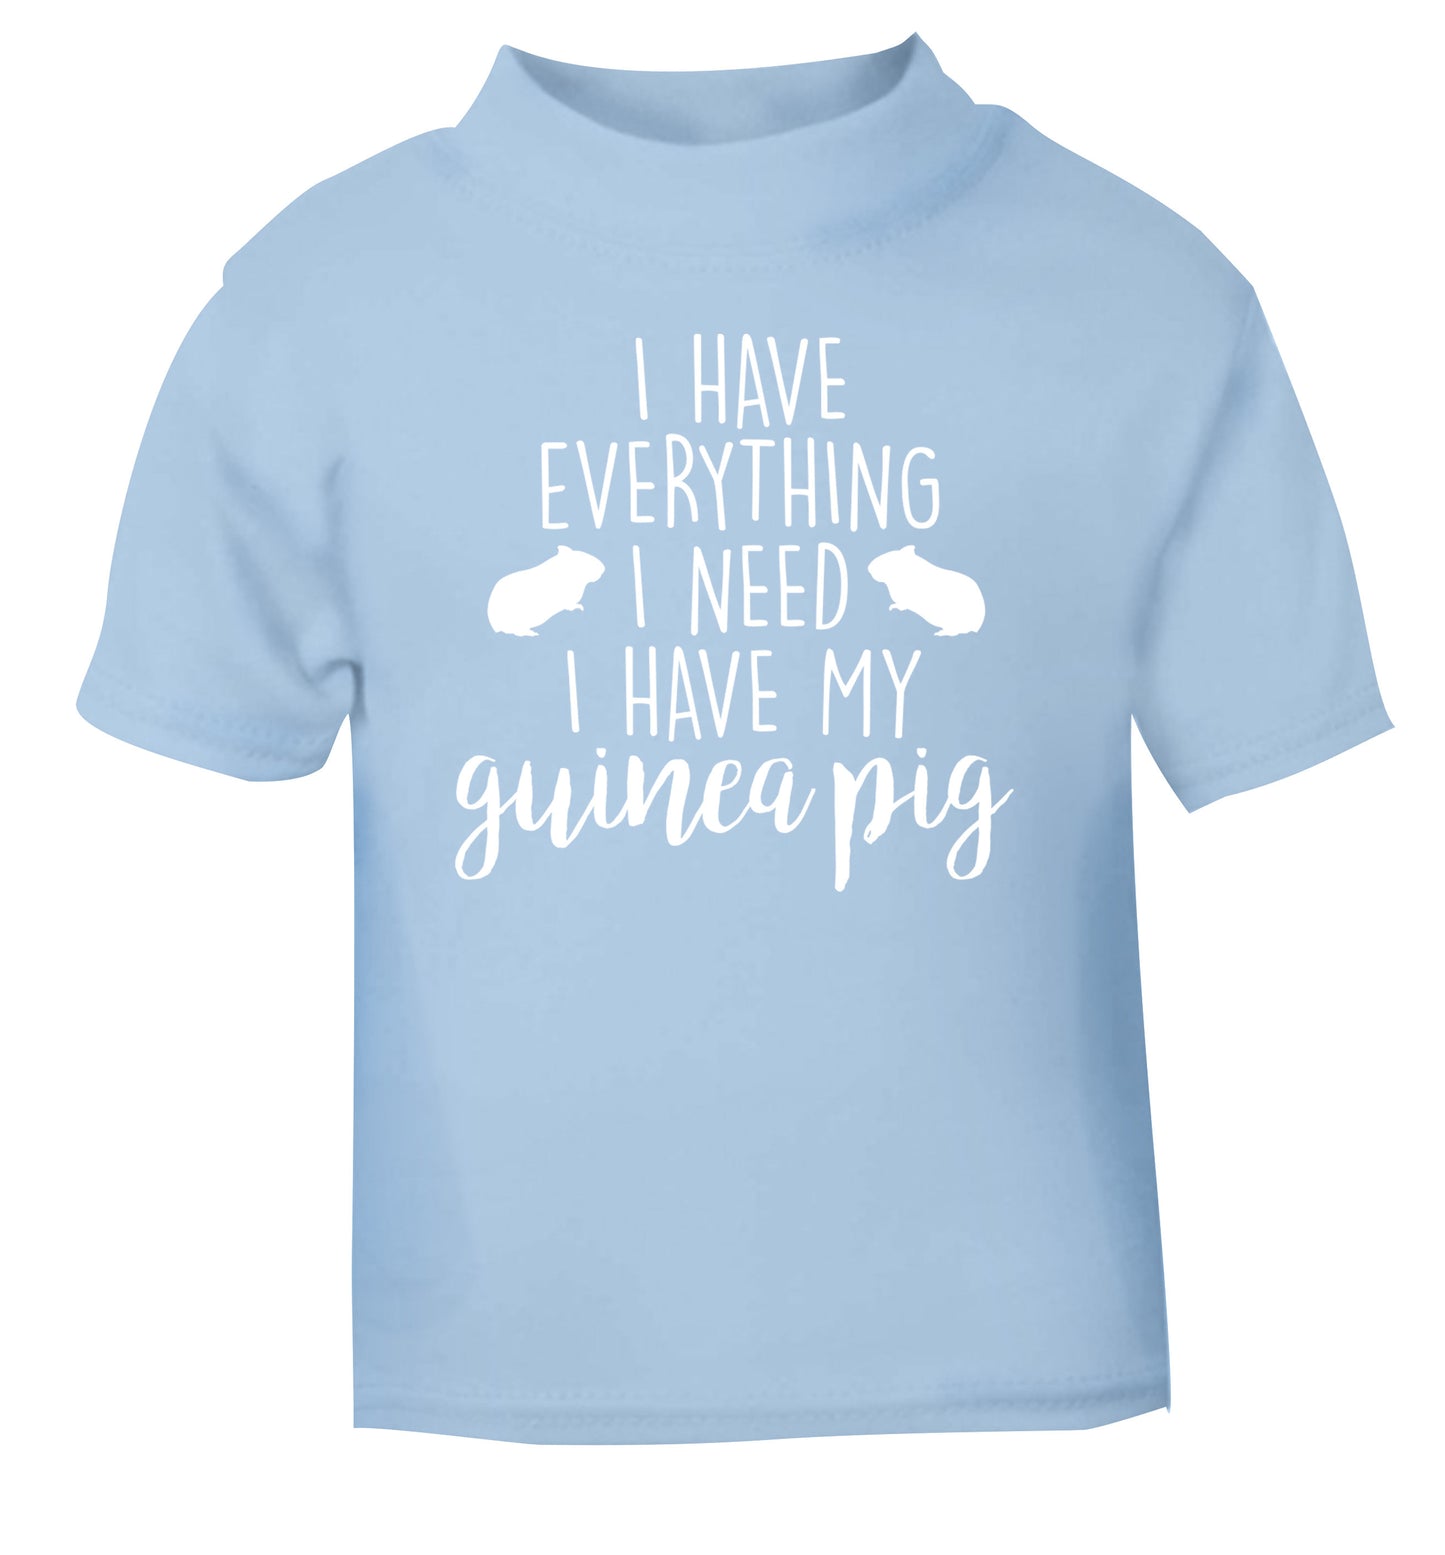 I have everything I need, I have my guinea pig light blue Baby Toddler Tshirt 2 Years